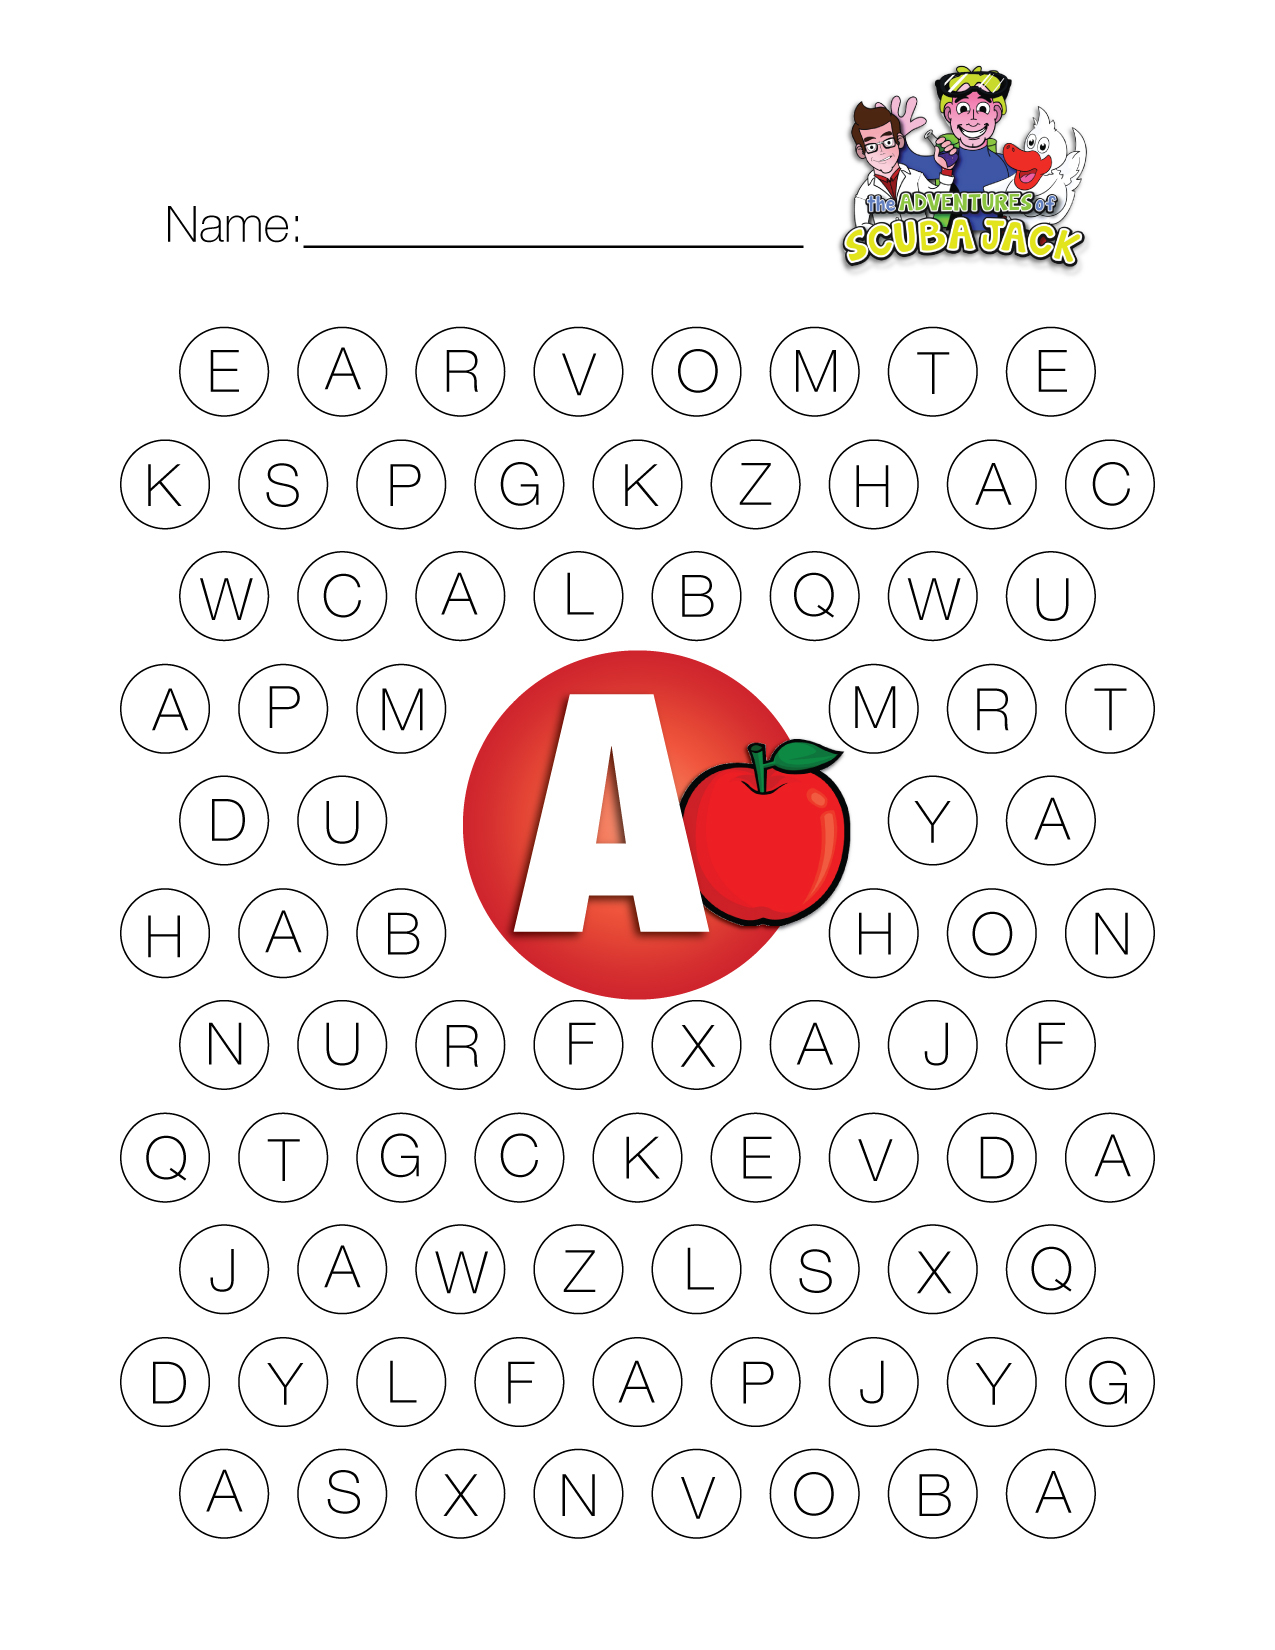 A-Z Dauber Worksheets That Are A Blast! | The Preschool with Alphabet Dauber Worksheets